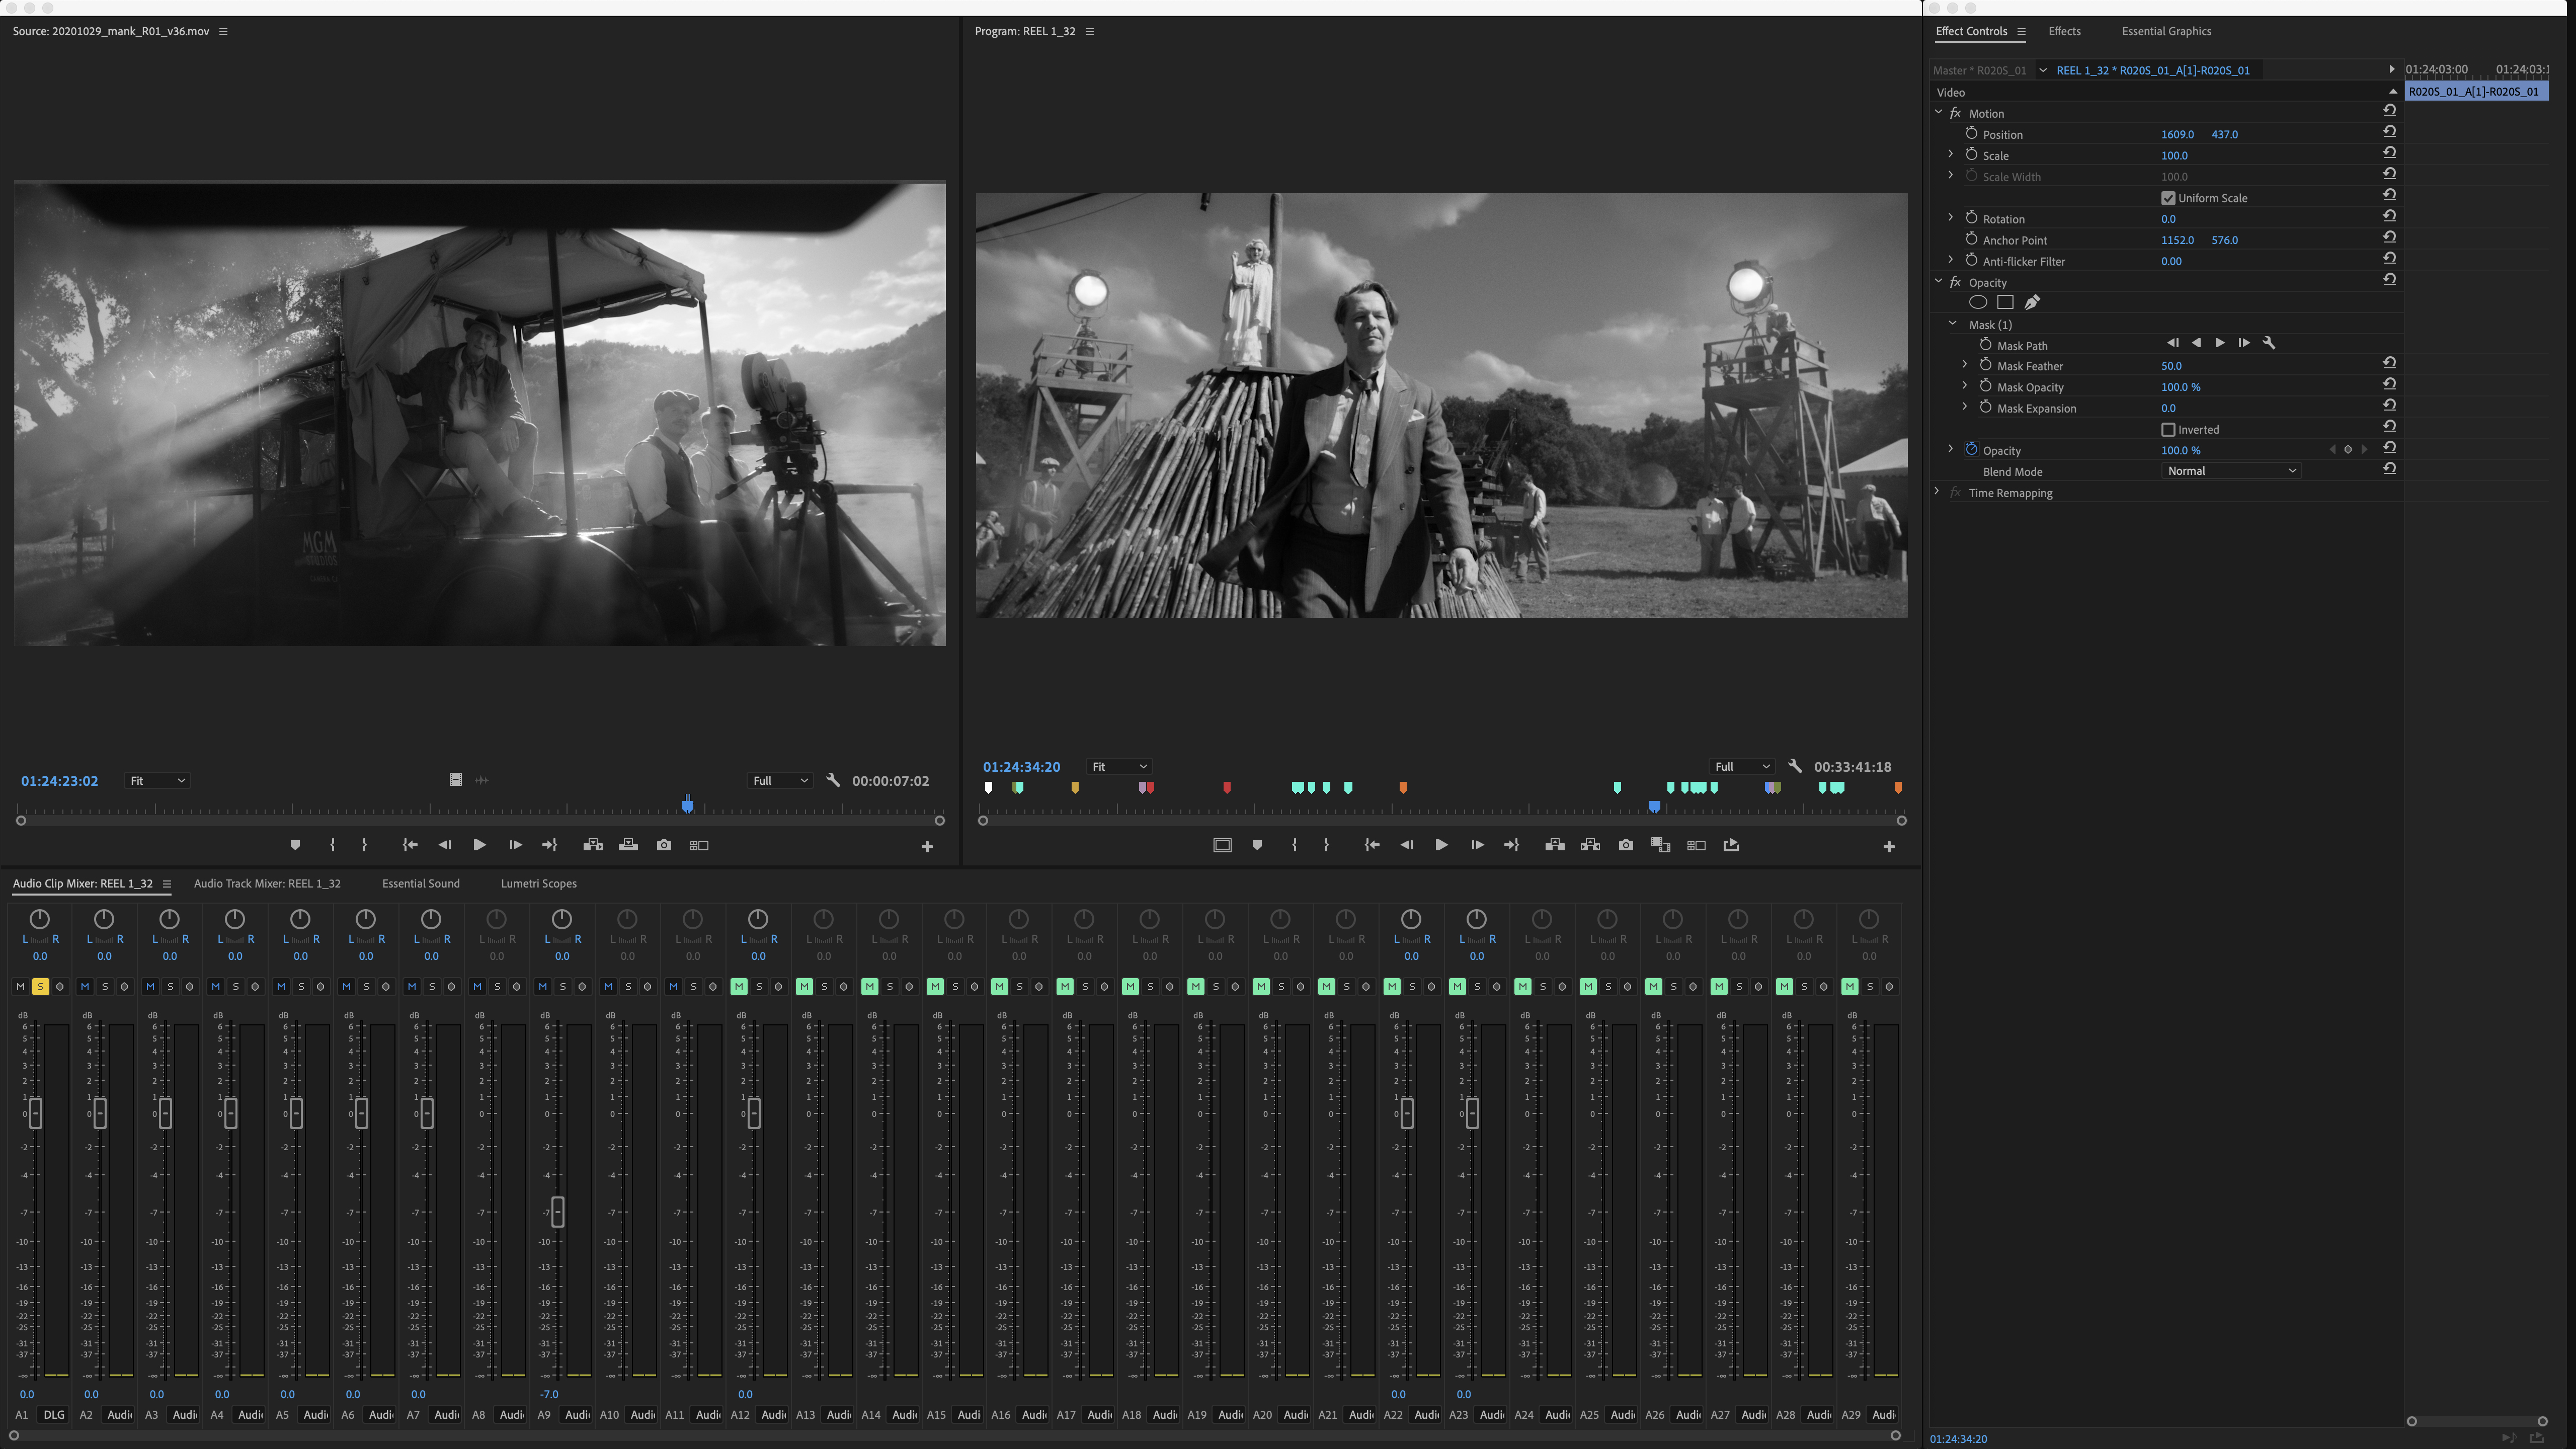 ART OF THE CUT on the workflows and methods for editing "Mank" 7